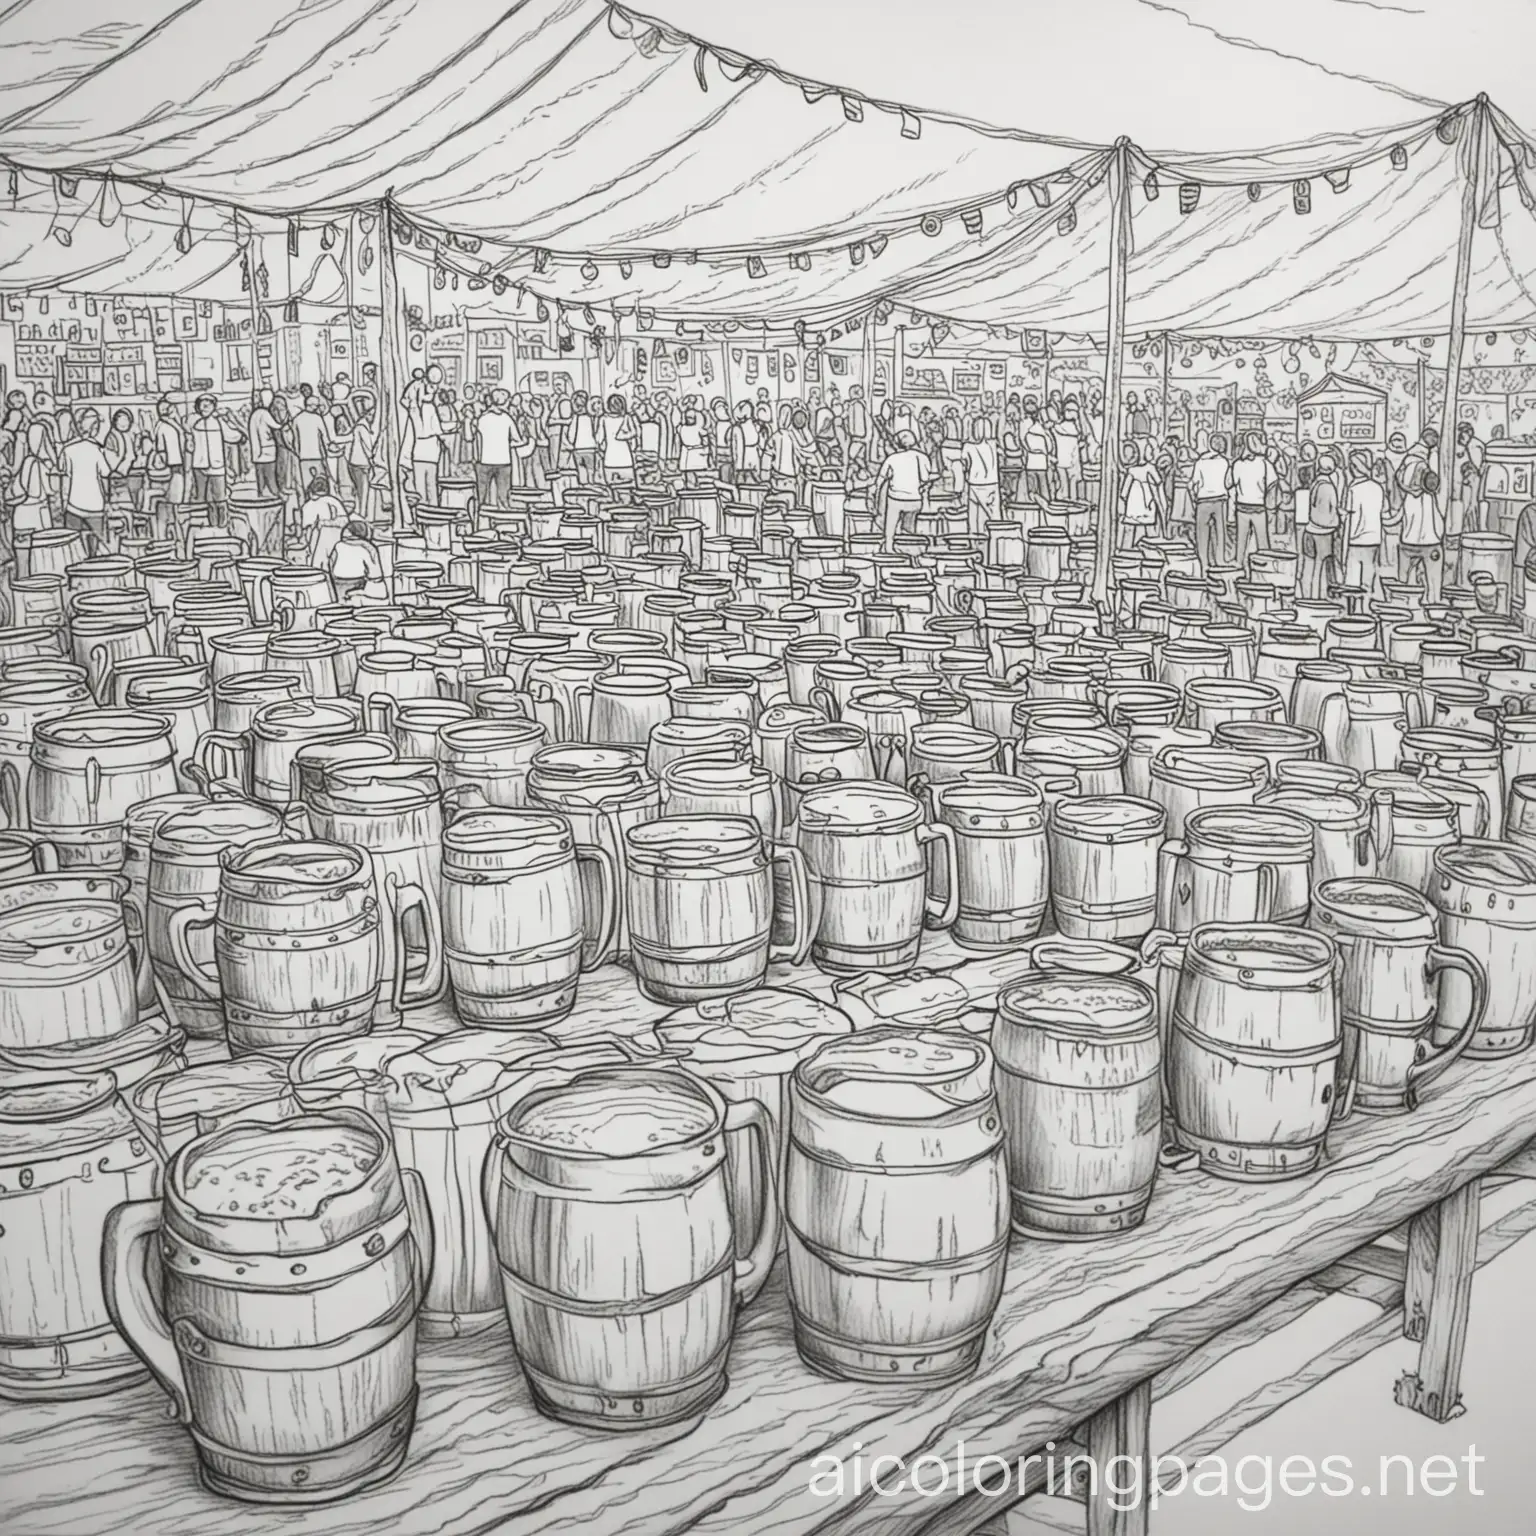 Make a coloring page of a Beer Festival Scene:

Background: A bustling outdoor beer festival with rows of colorful tents and tables. Imagine a sunny day with people of different ages and backgrounds enjoying themselves.
Main Illustration: Various beer mugs and glasses filled with different types of beer—pale ales, stouts, lagers, etc. Some mugs have foam overflowing, adding a dynamic feel.
Foreground: Include beer barrels, pretzels, and beer taps. People are laughing, toasting, and holding up their mugs in cheers., Coloring Page, black and white, line art, white background, Simplicity, Ample White Space. The background of the coloring page is plain white to make it easy for young children to color within the lines. The outlines of all the subjects are easy to distinguish, making it simple for kids to color without too much difficulty